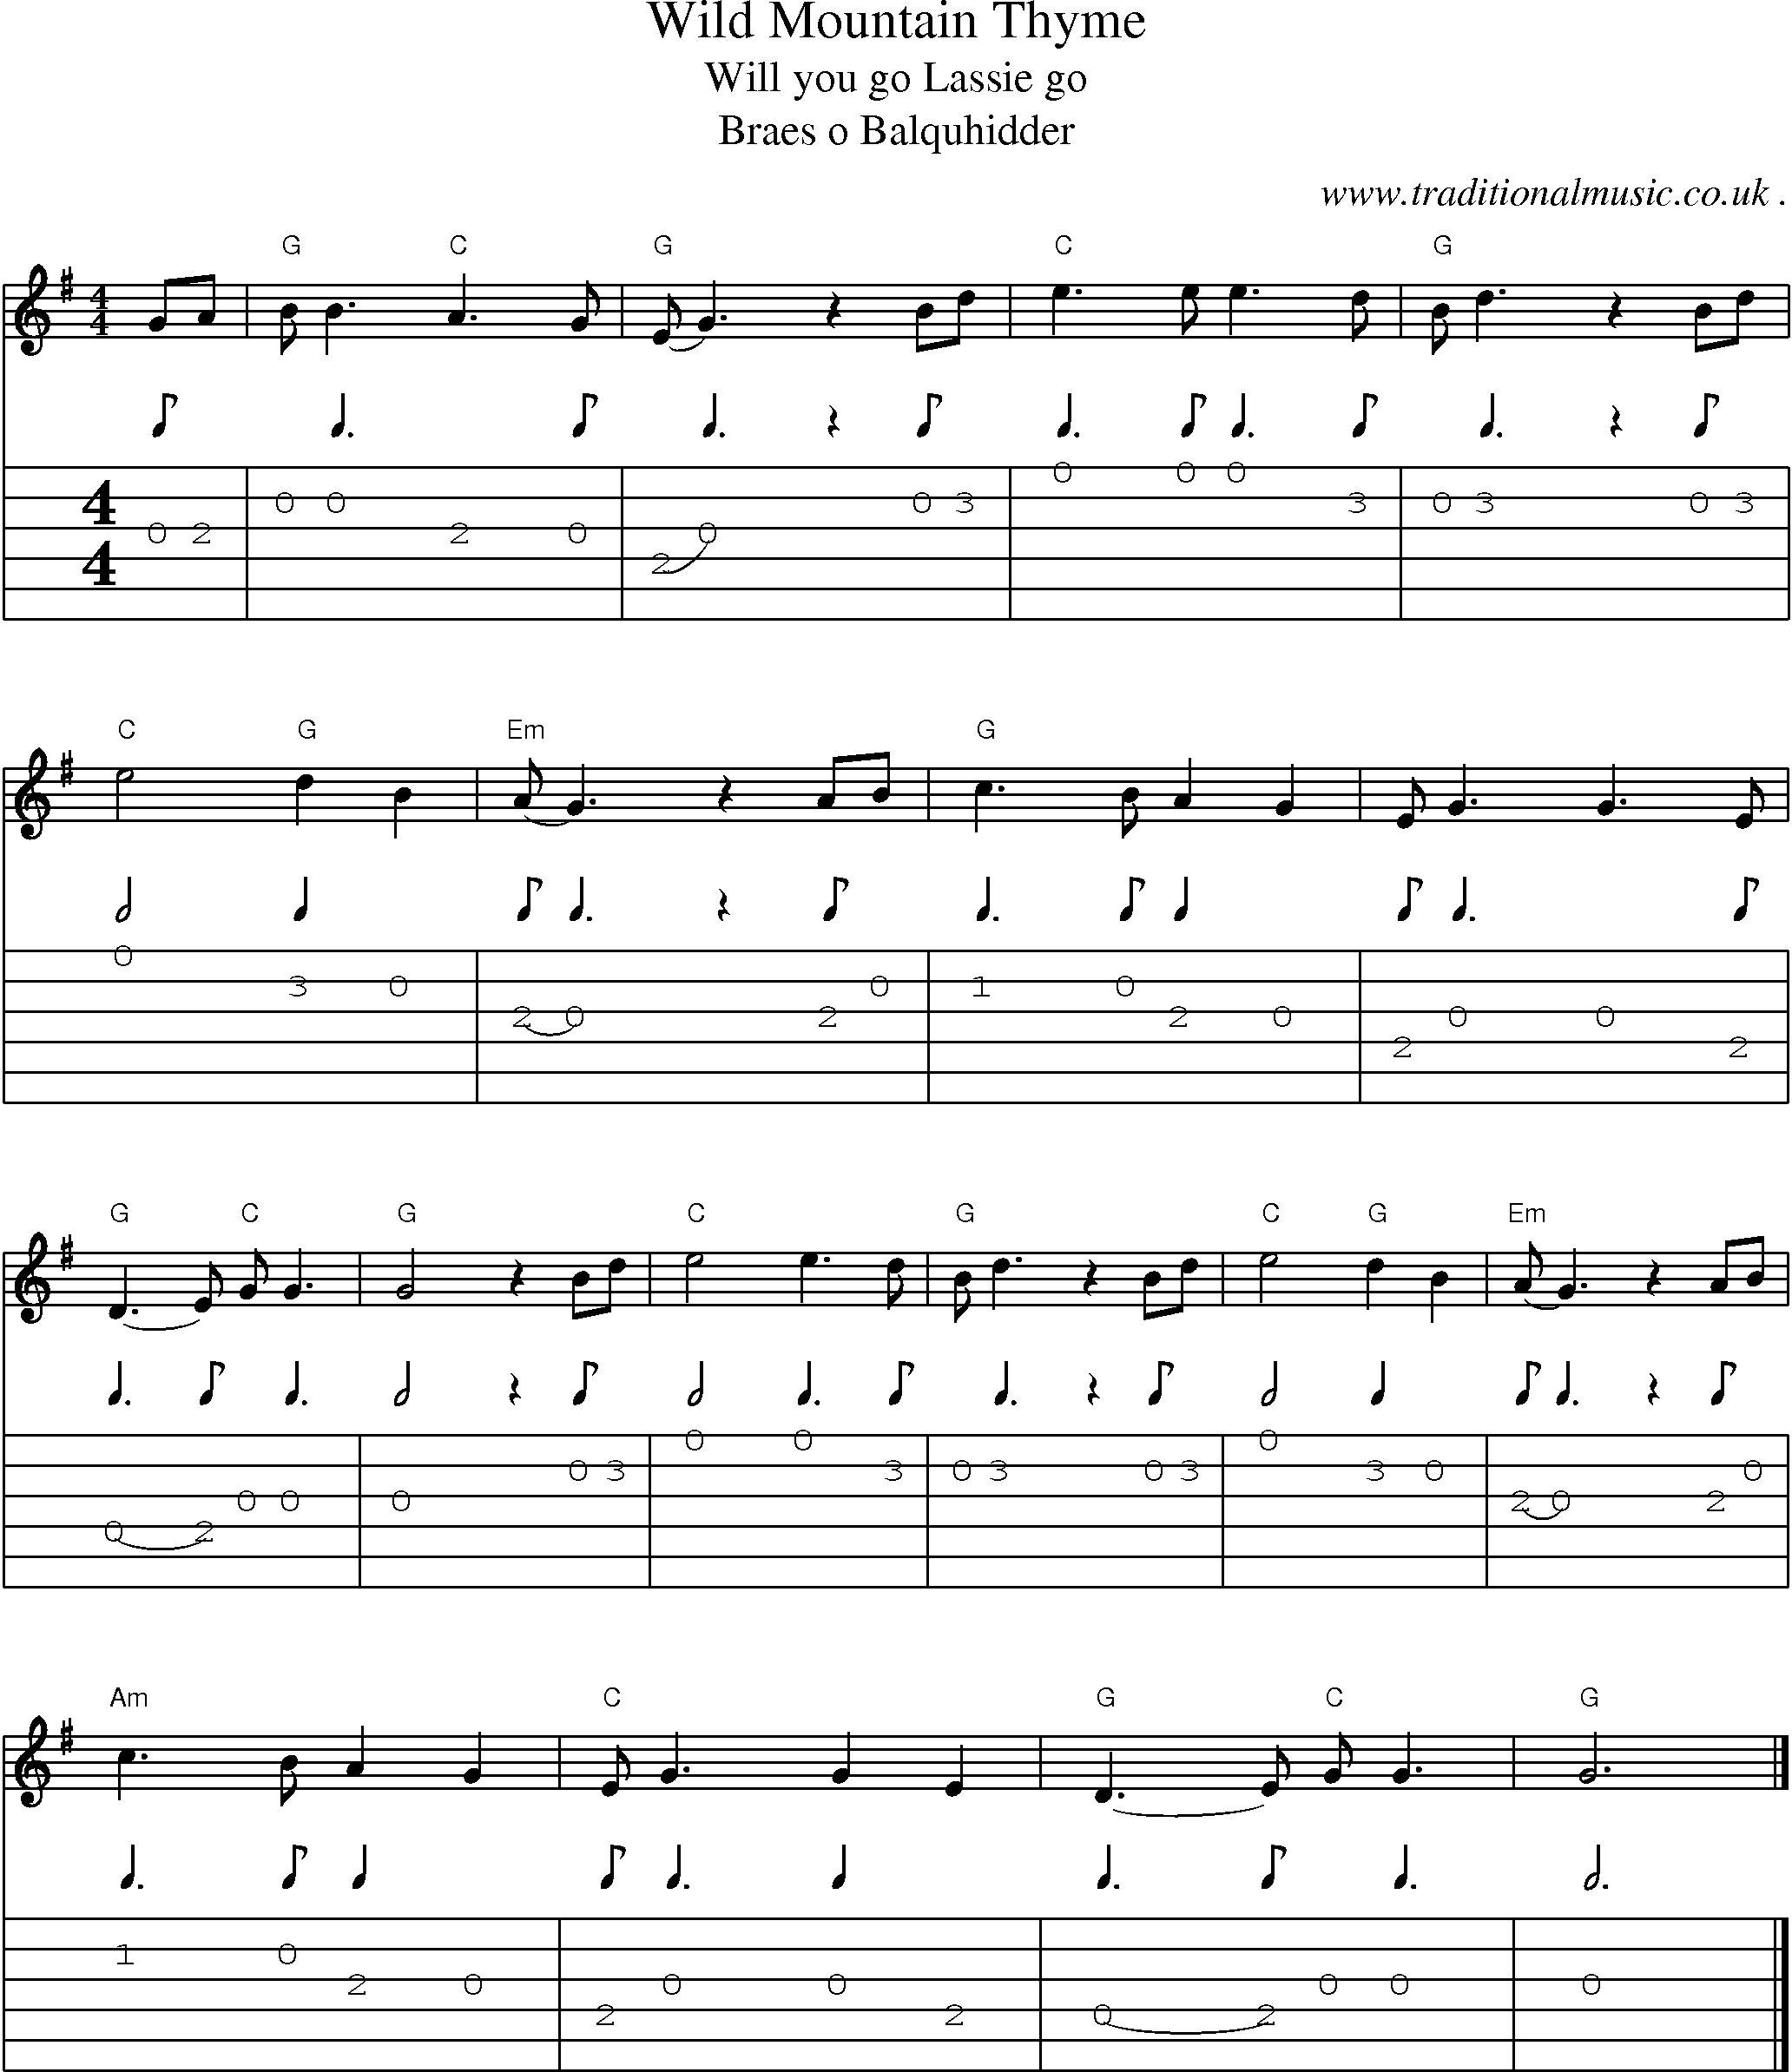 Music Score and Guitar Tabs for Wild Mountain Thyme